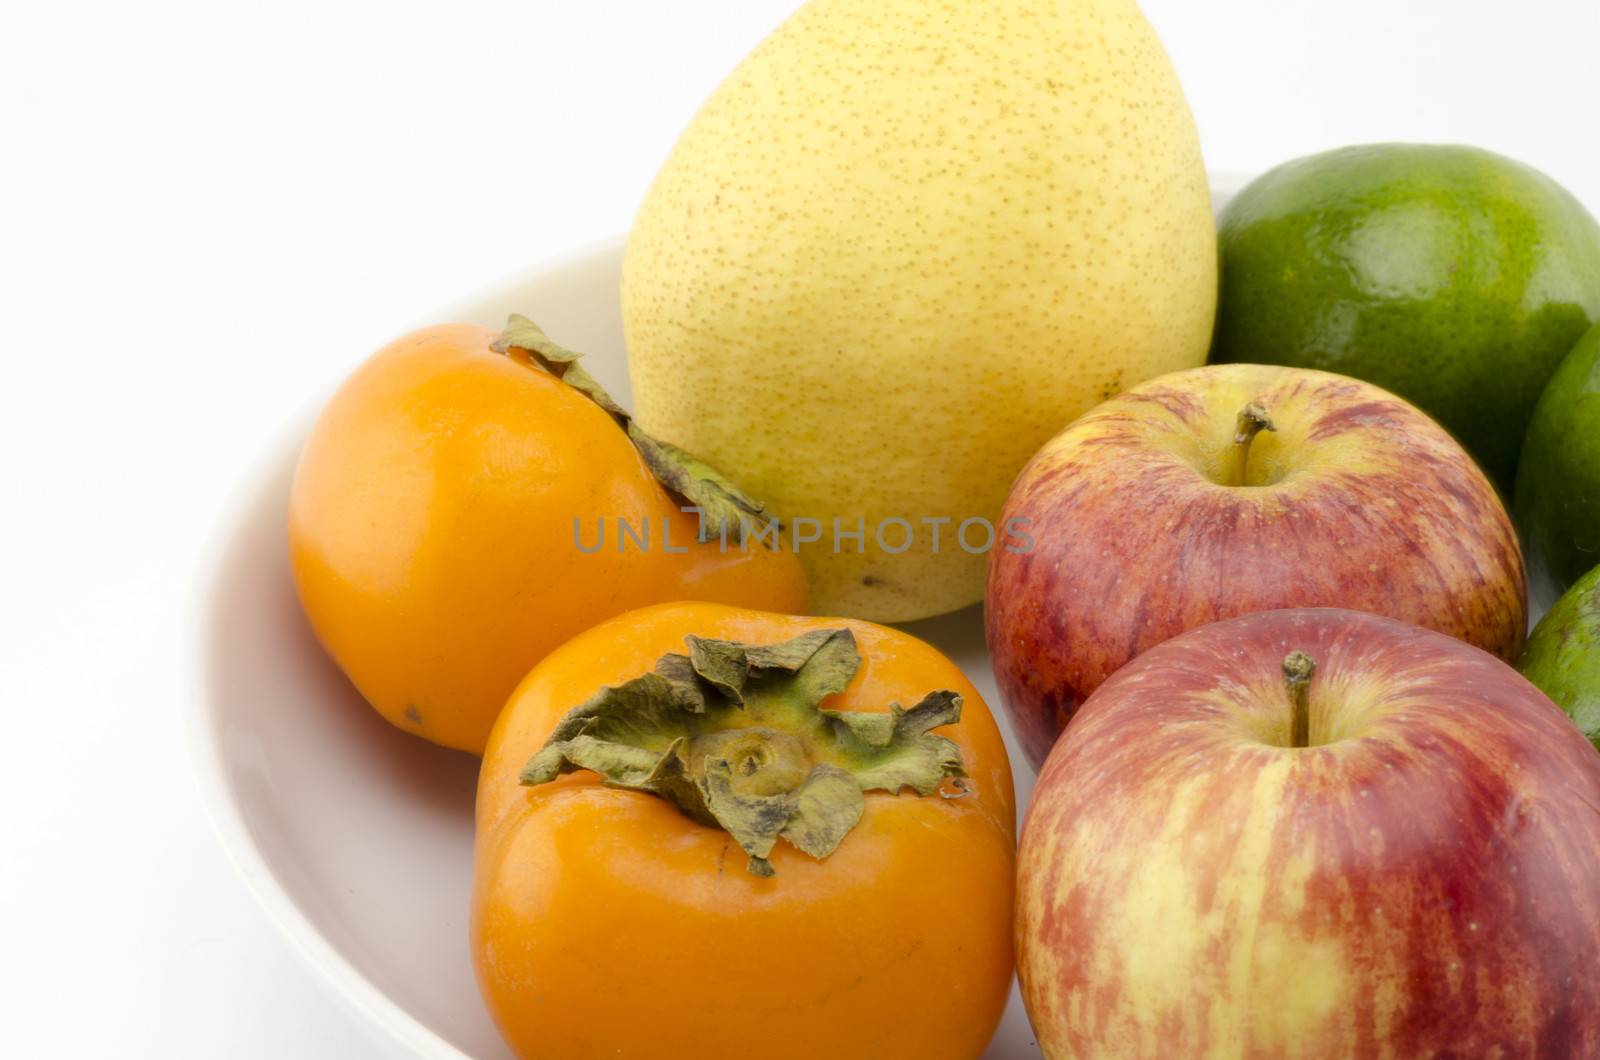 chinese pear apple green orange and persimon on white dish isolated on white background